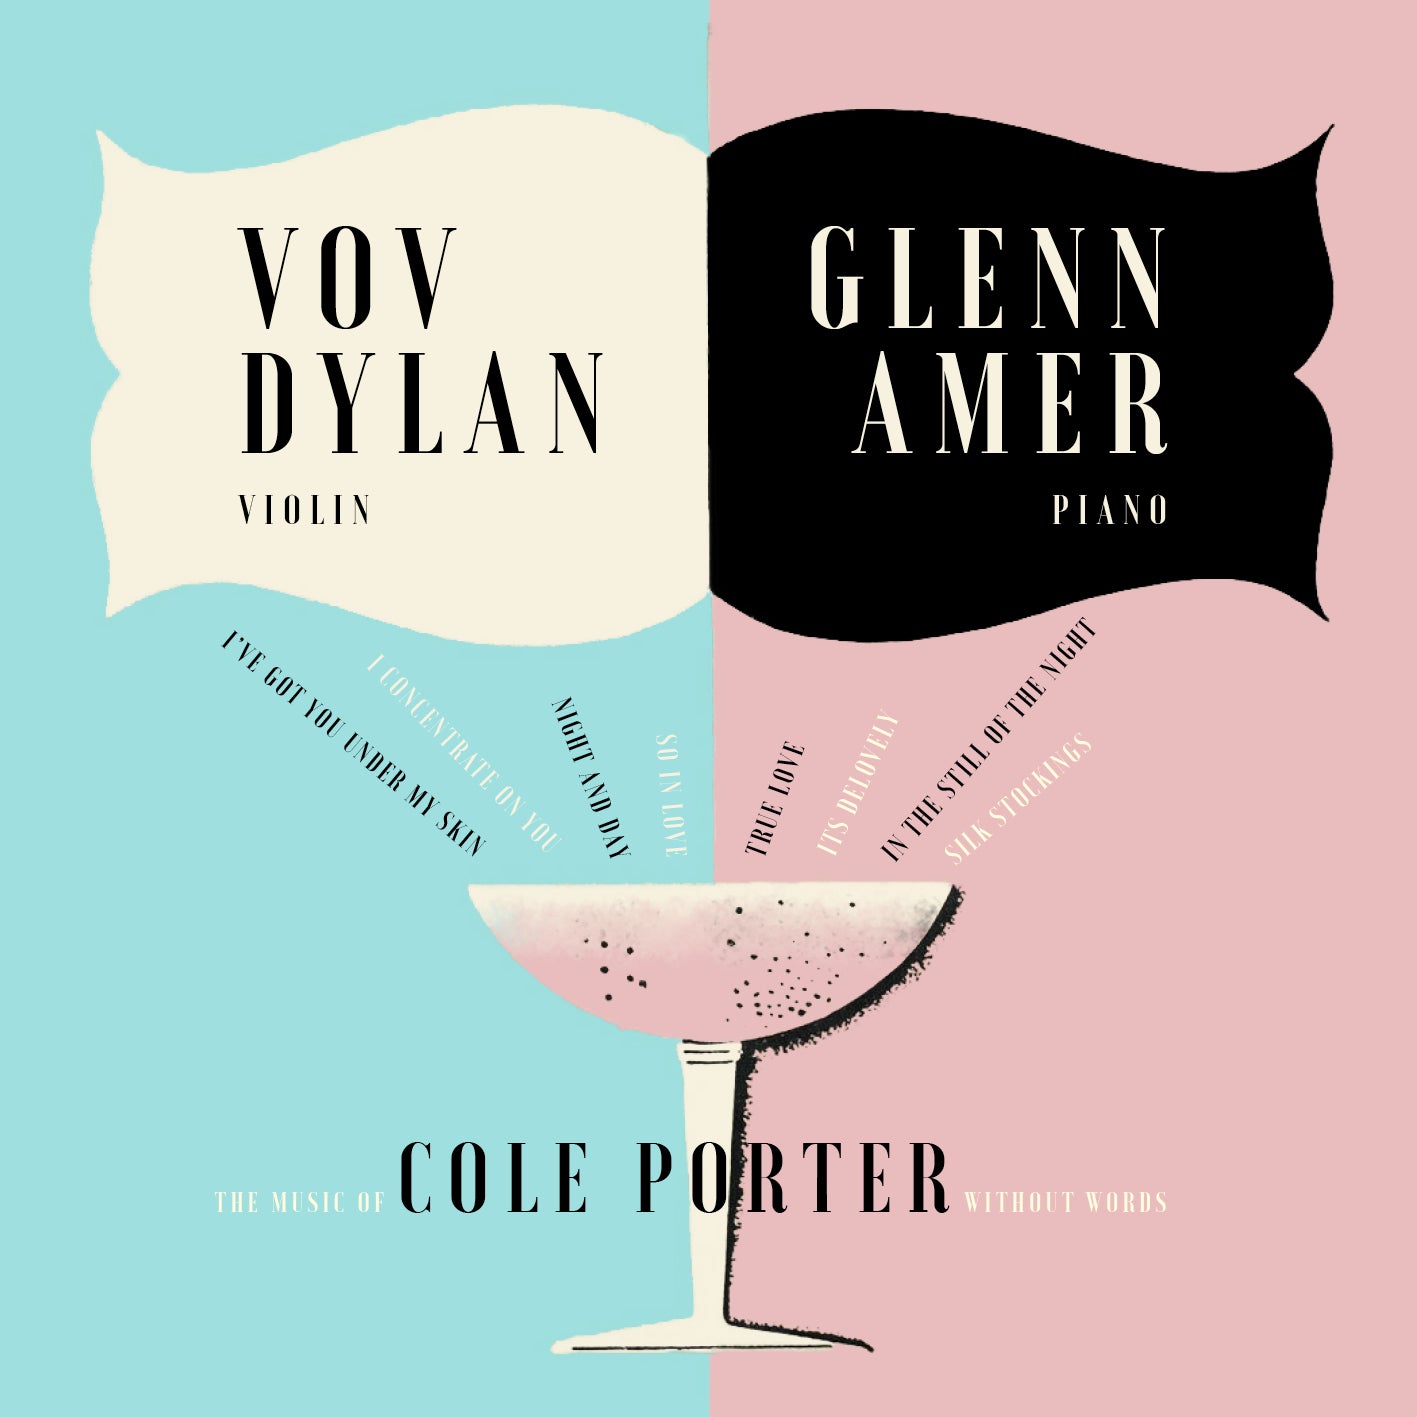 VOV DYLAN & GLENN AMER - THE MUSIC OF COLE PORTER WITHOUT WORDS